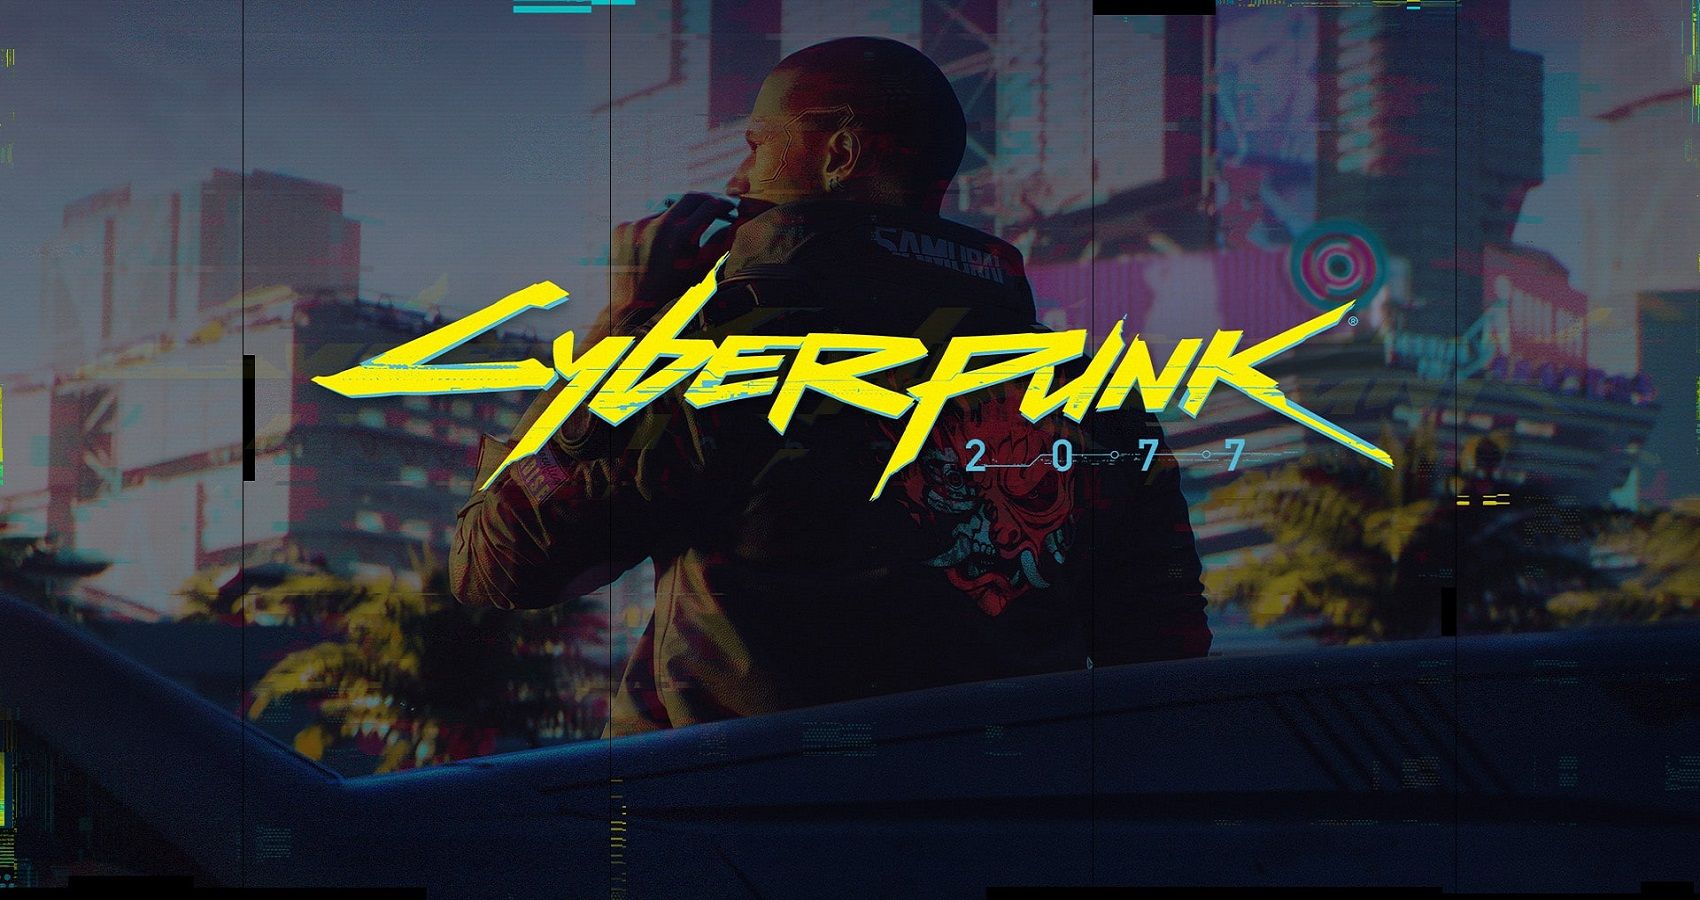 Cyberpunk 2077: 10 Facts You Need To Know From E3 2019 | TheGamer